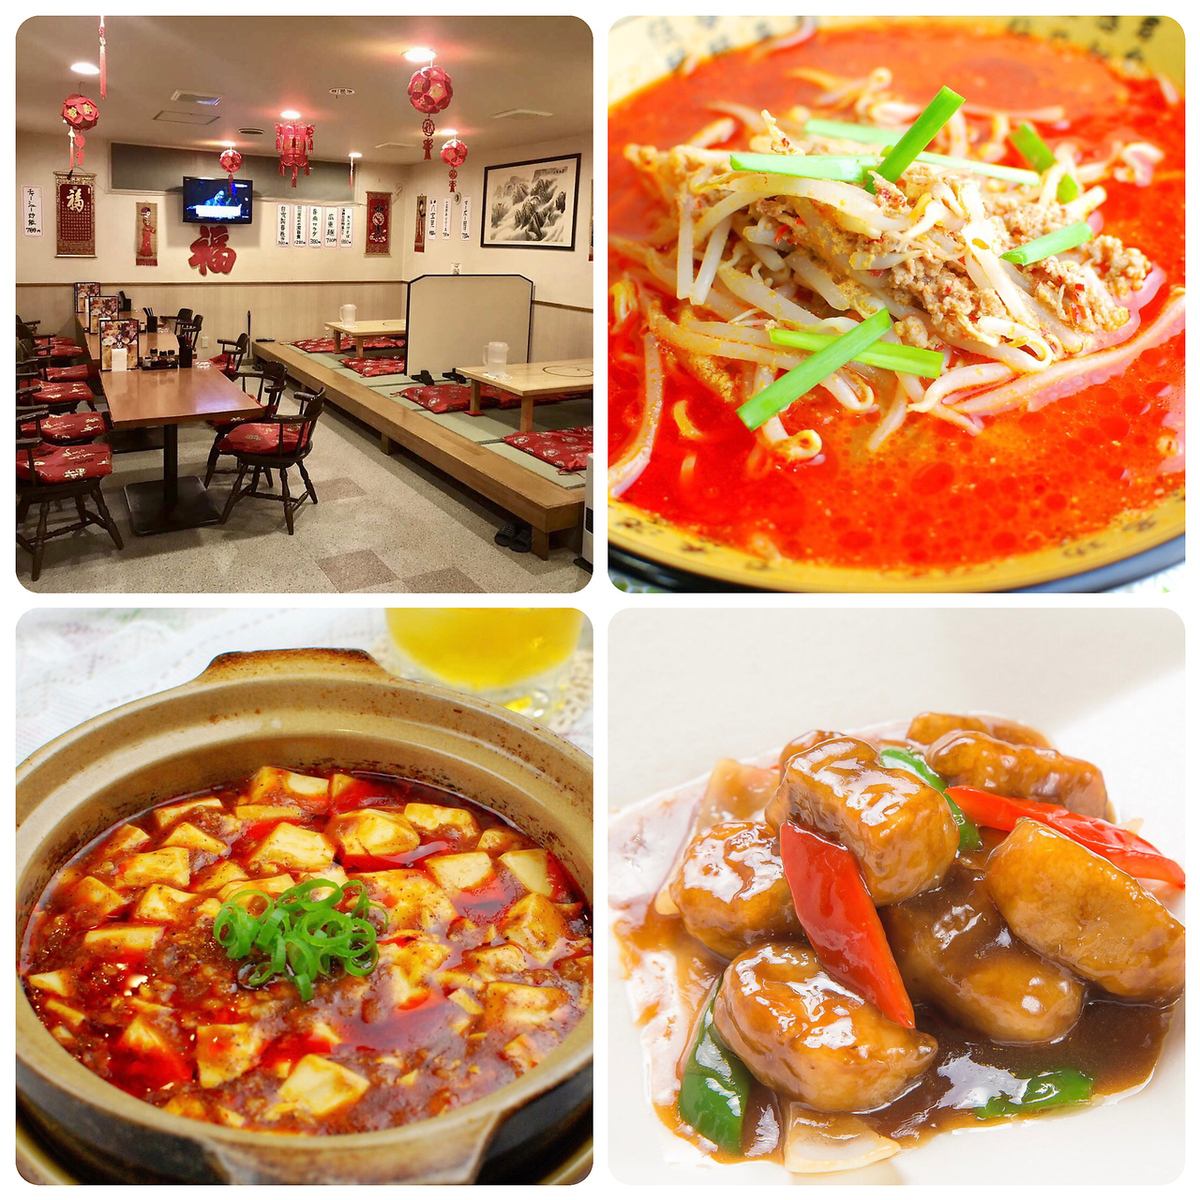 Cheap and delicious! A restaurant in Shiroishi where you can casually enjoy a wide variety of authentic Chinese food prepared by authentic chefs